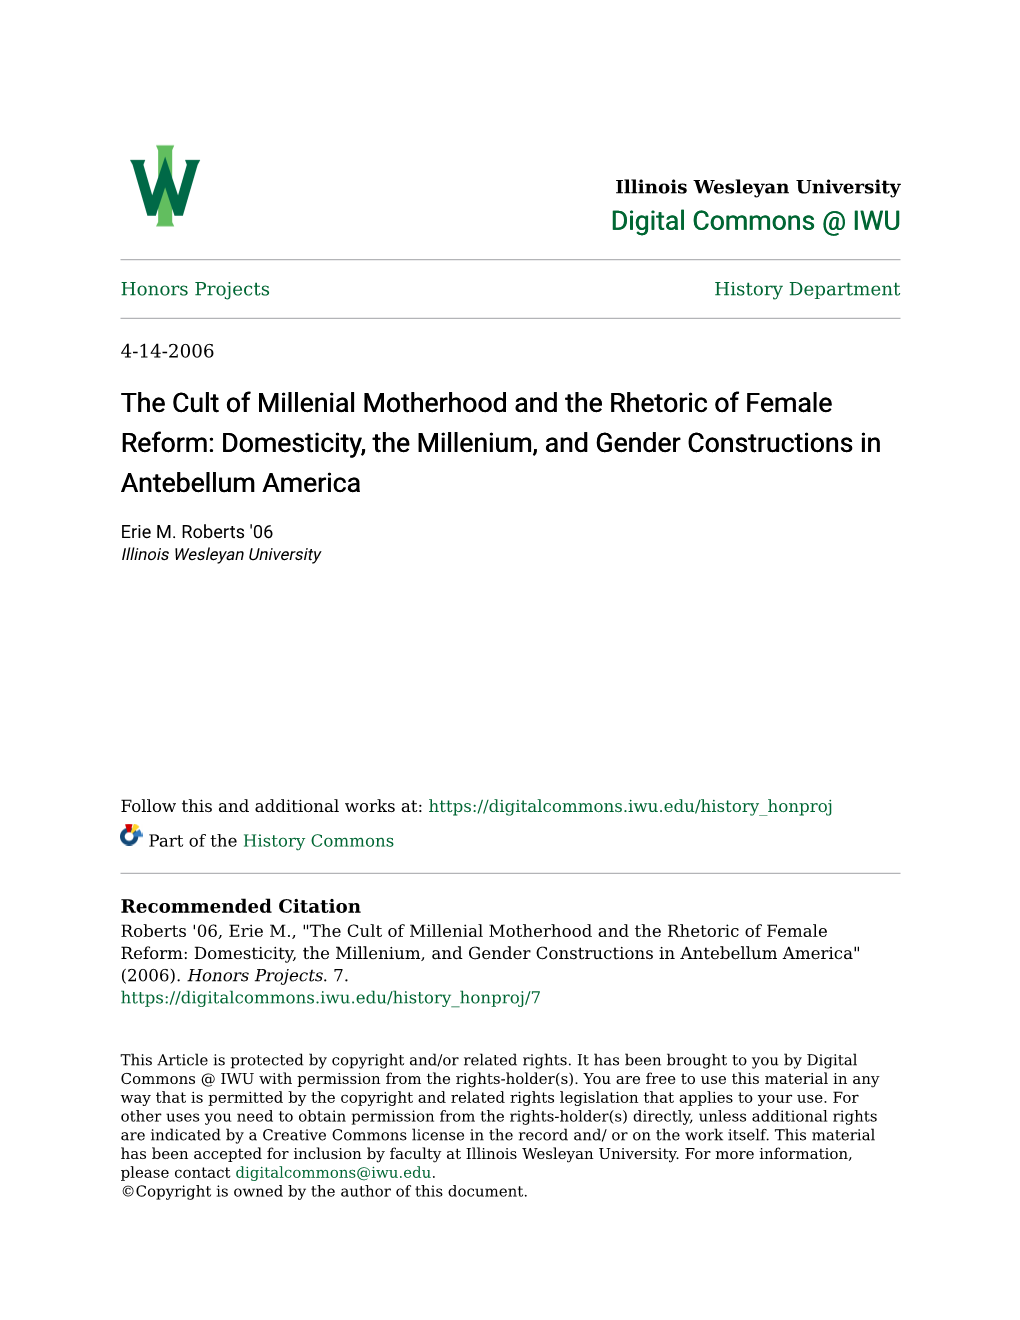 The Cult of Millenial Motherhood and the Rhetoric of Female Reform: Domesticity, the Millenium, and Gender Constructions in Antebellum America